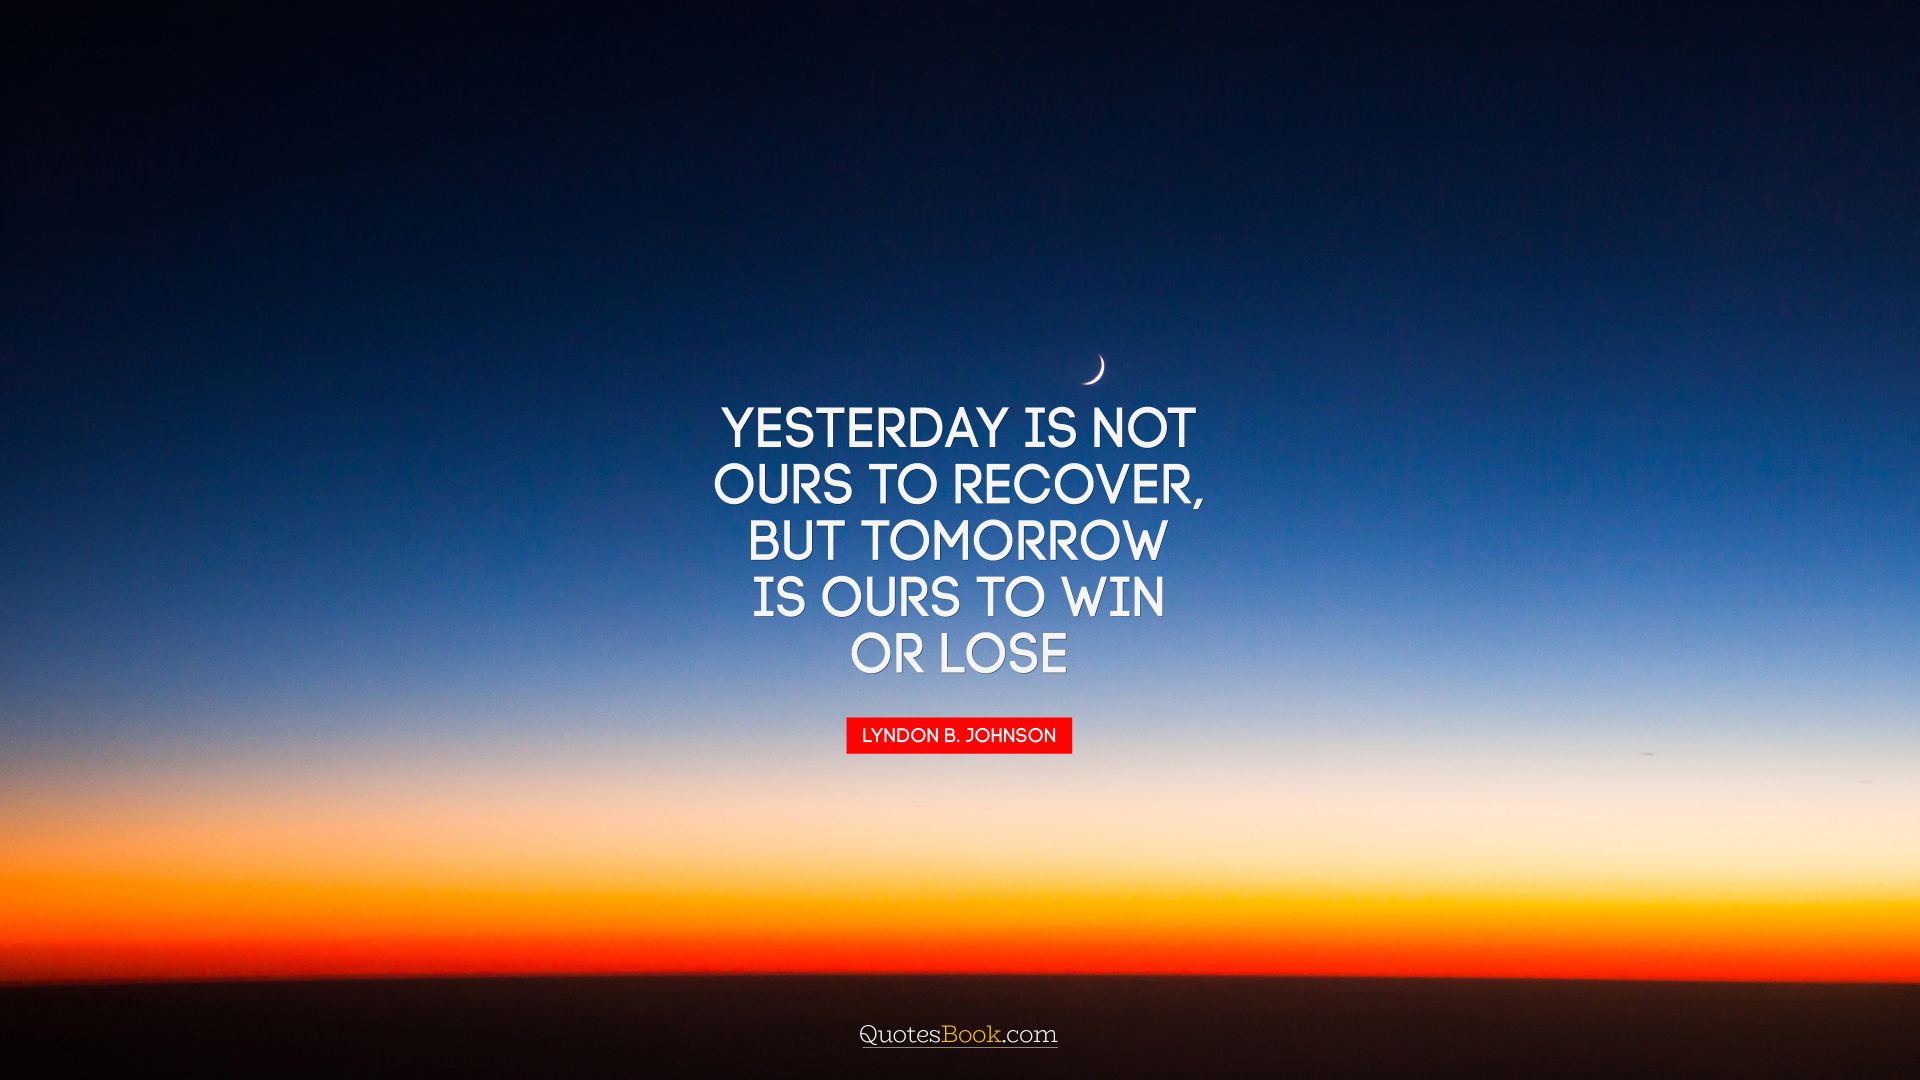 Yesterday is not ours to recover, but tomorrow is ours to win or lose. - Quote by Lyndon Baines Johnson